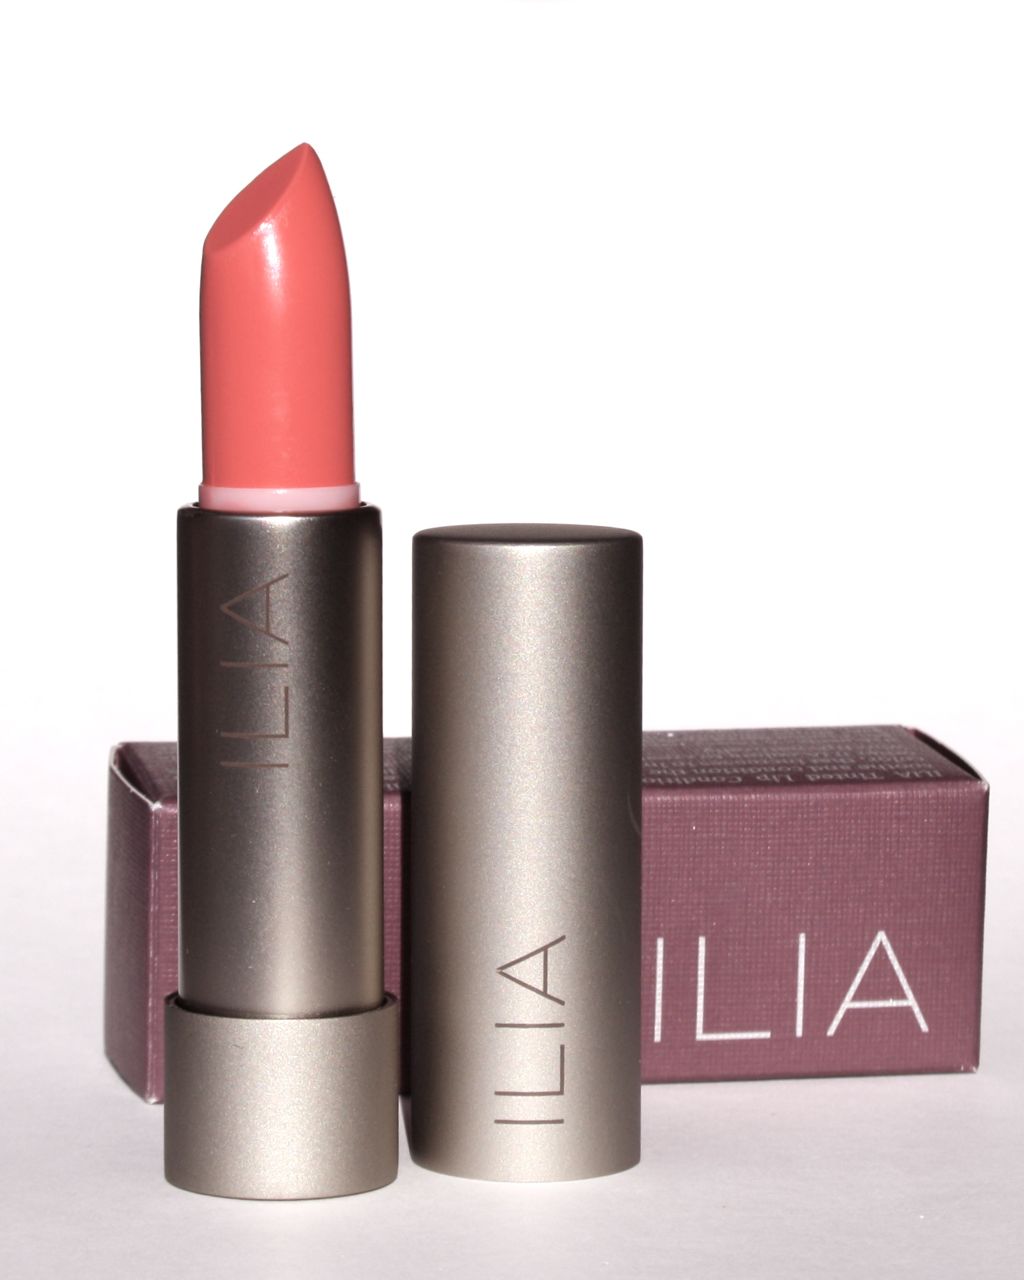 ILIA Tinted Lip Conditioner "Shell Shock" - Swatch and Review